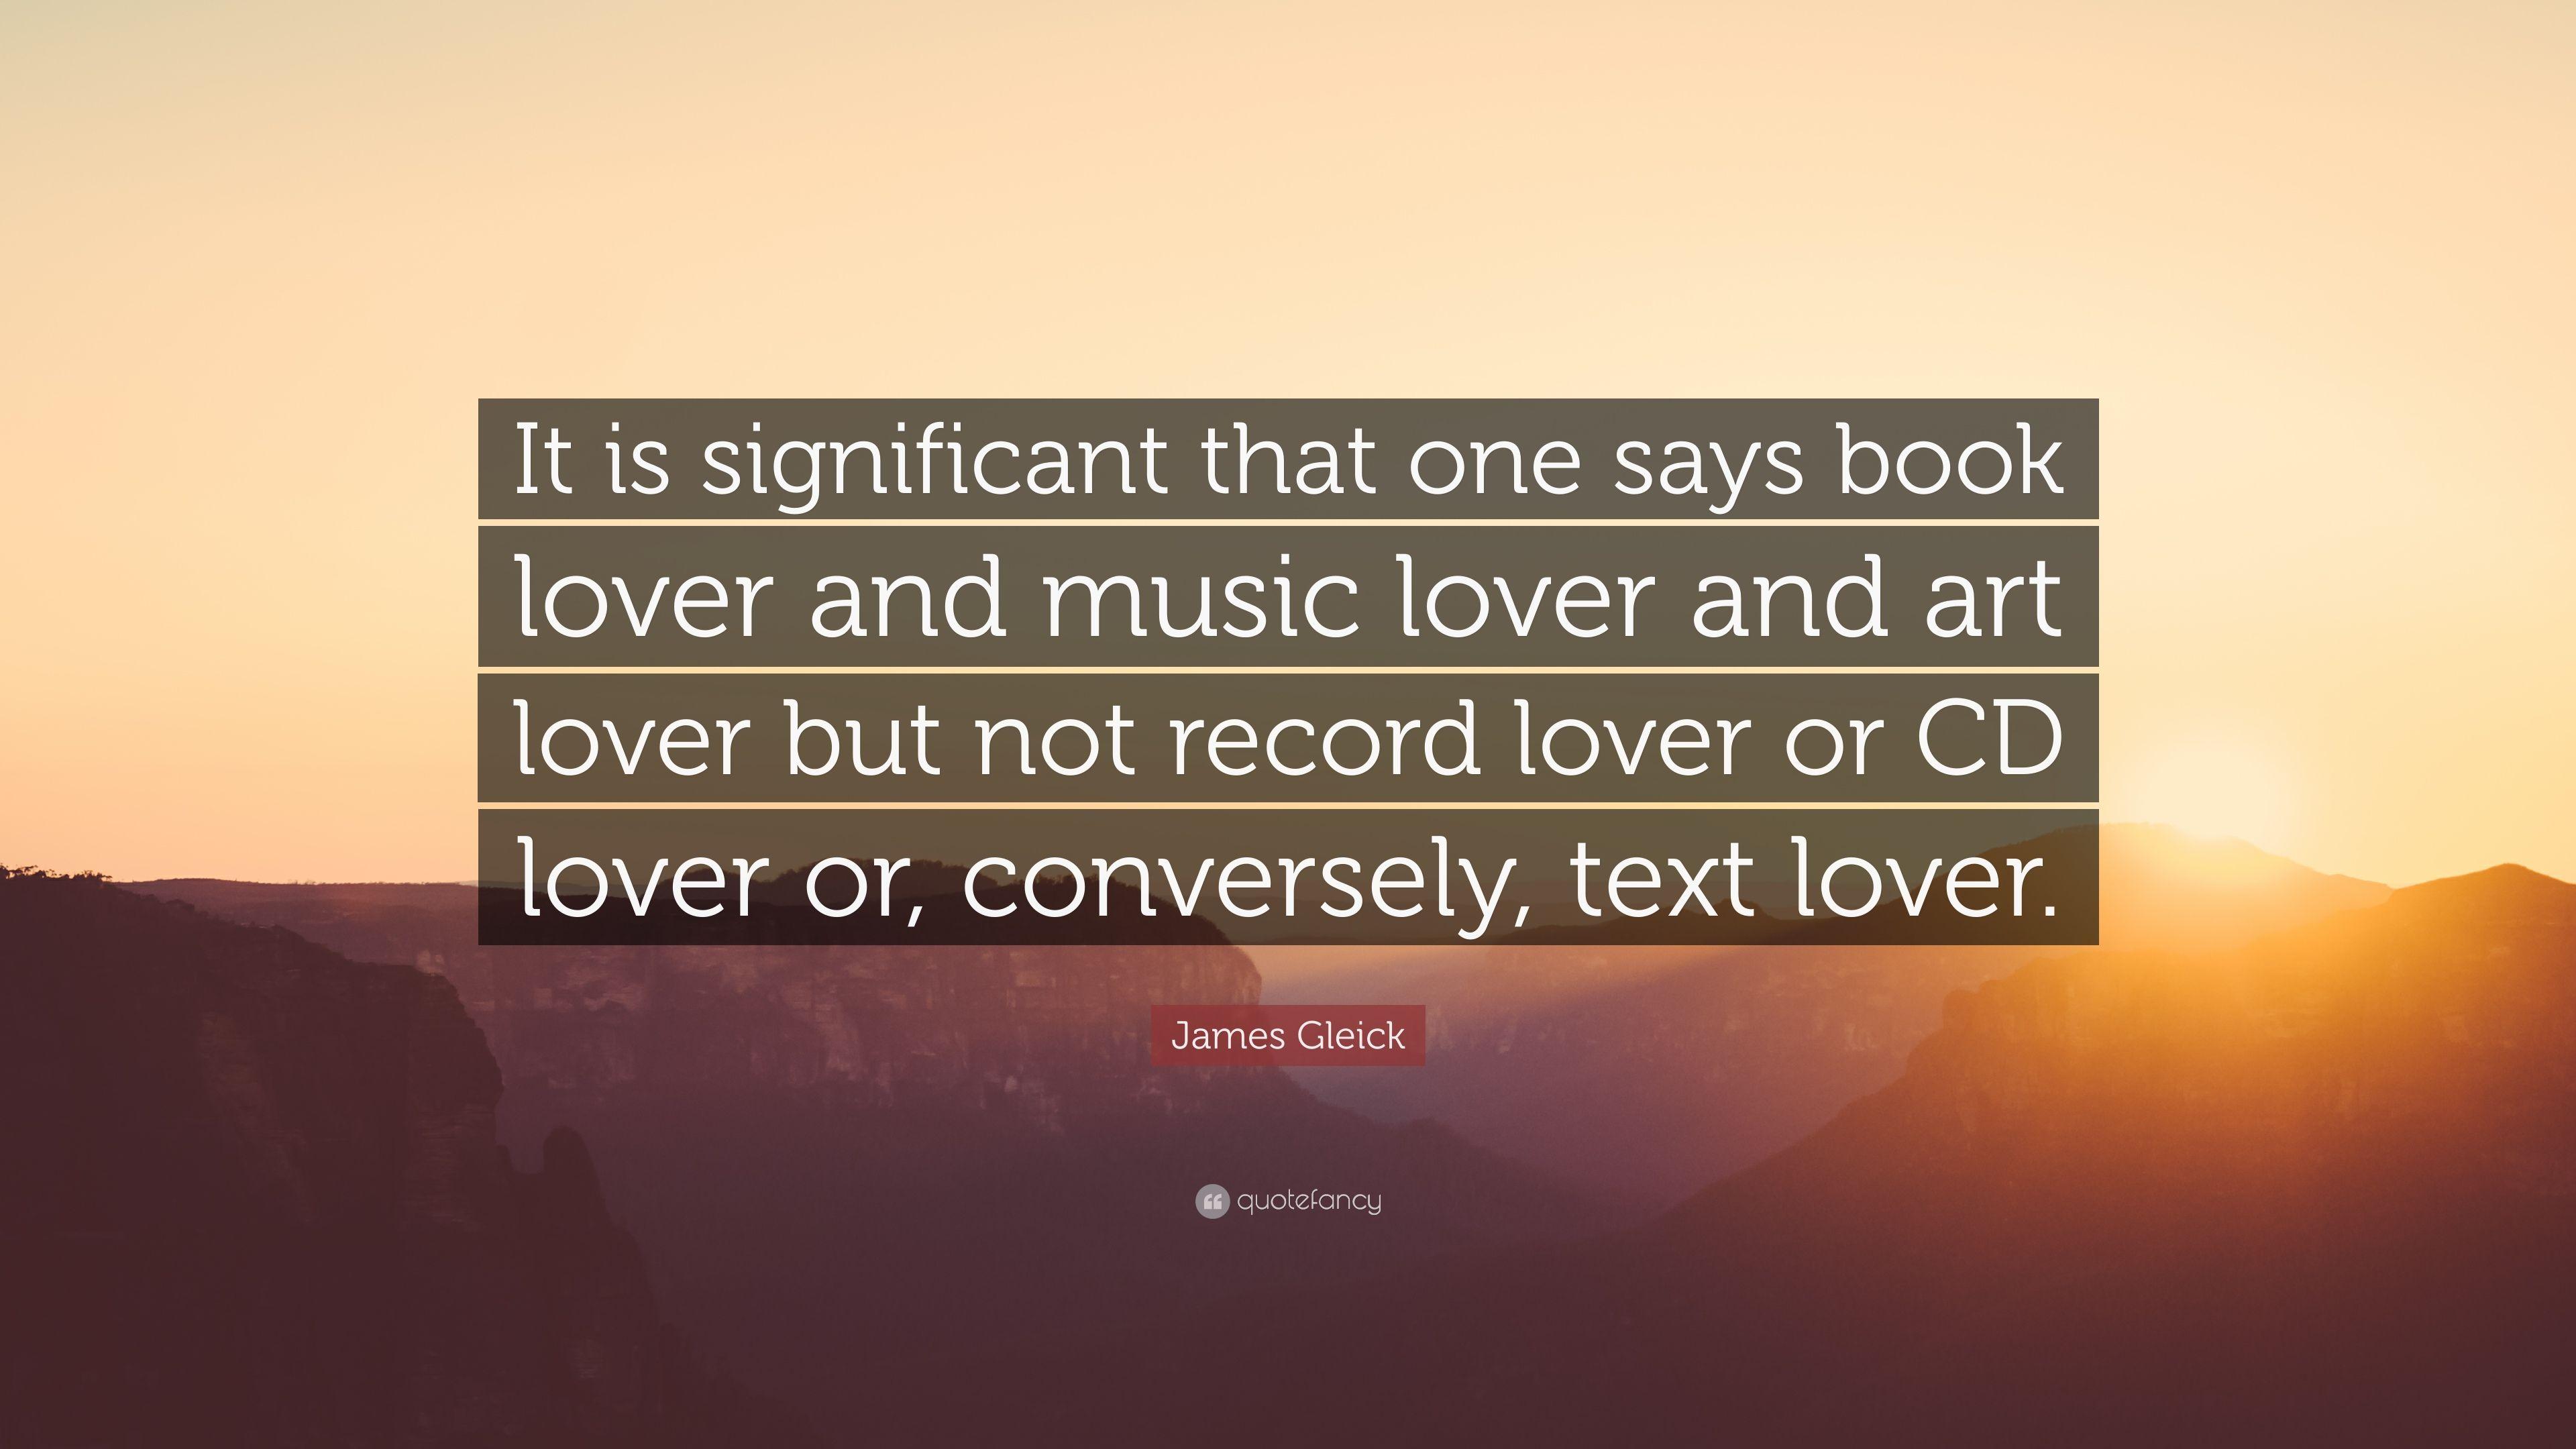 James Gleick Quote: “It is significant that one says book lover